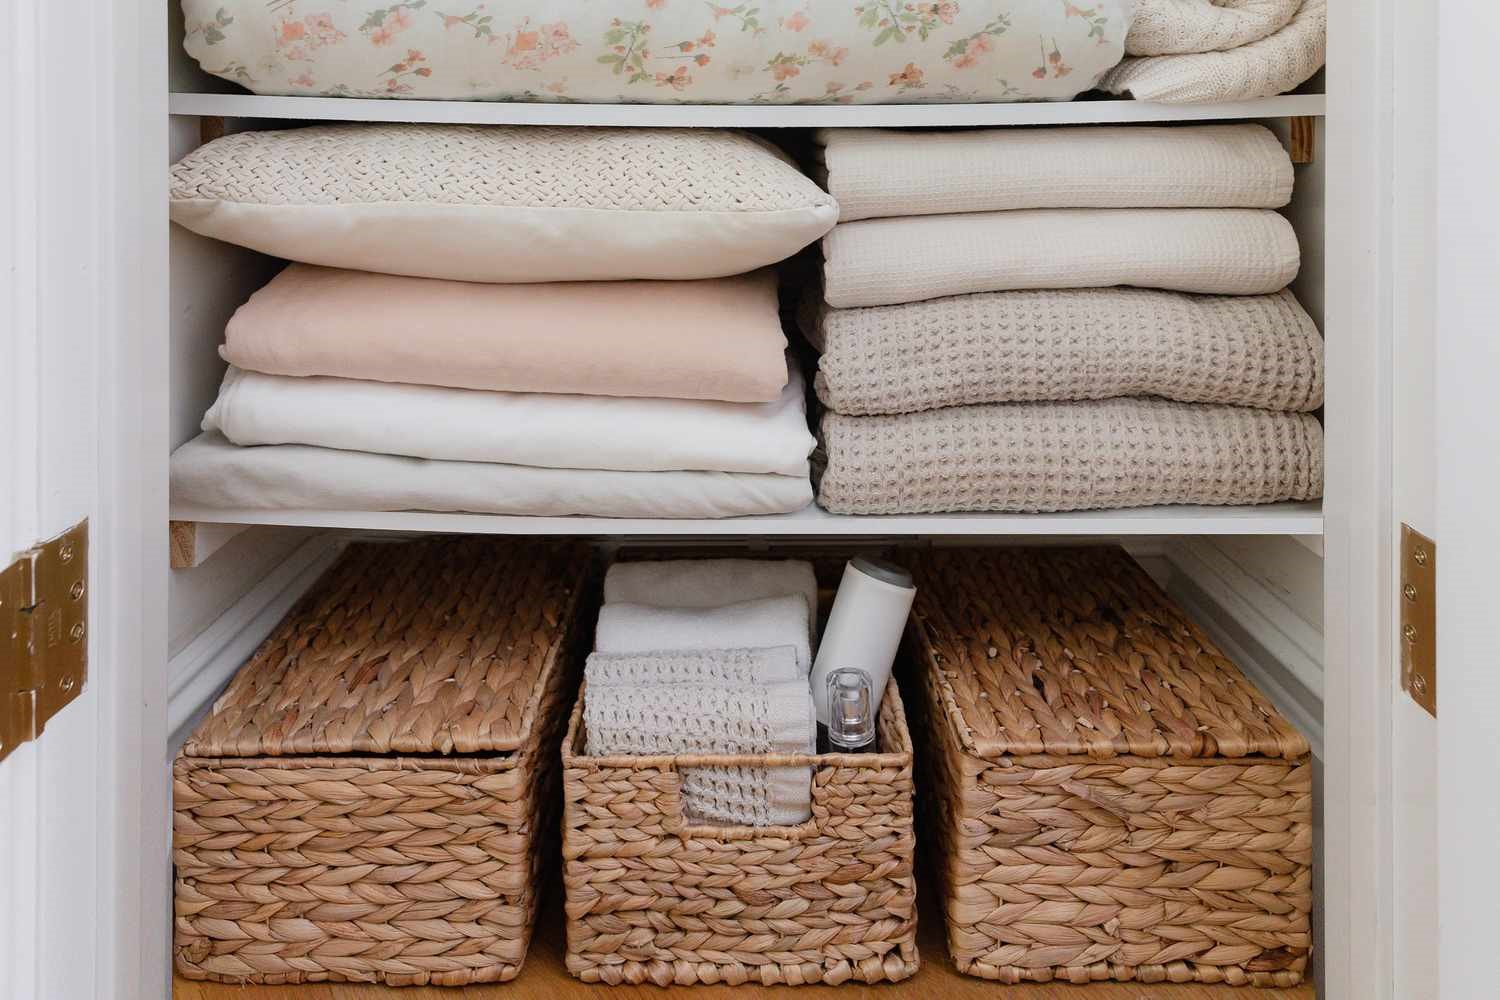 How To Store Bed Linen